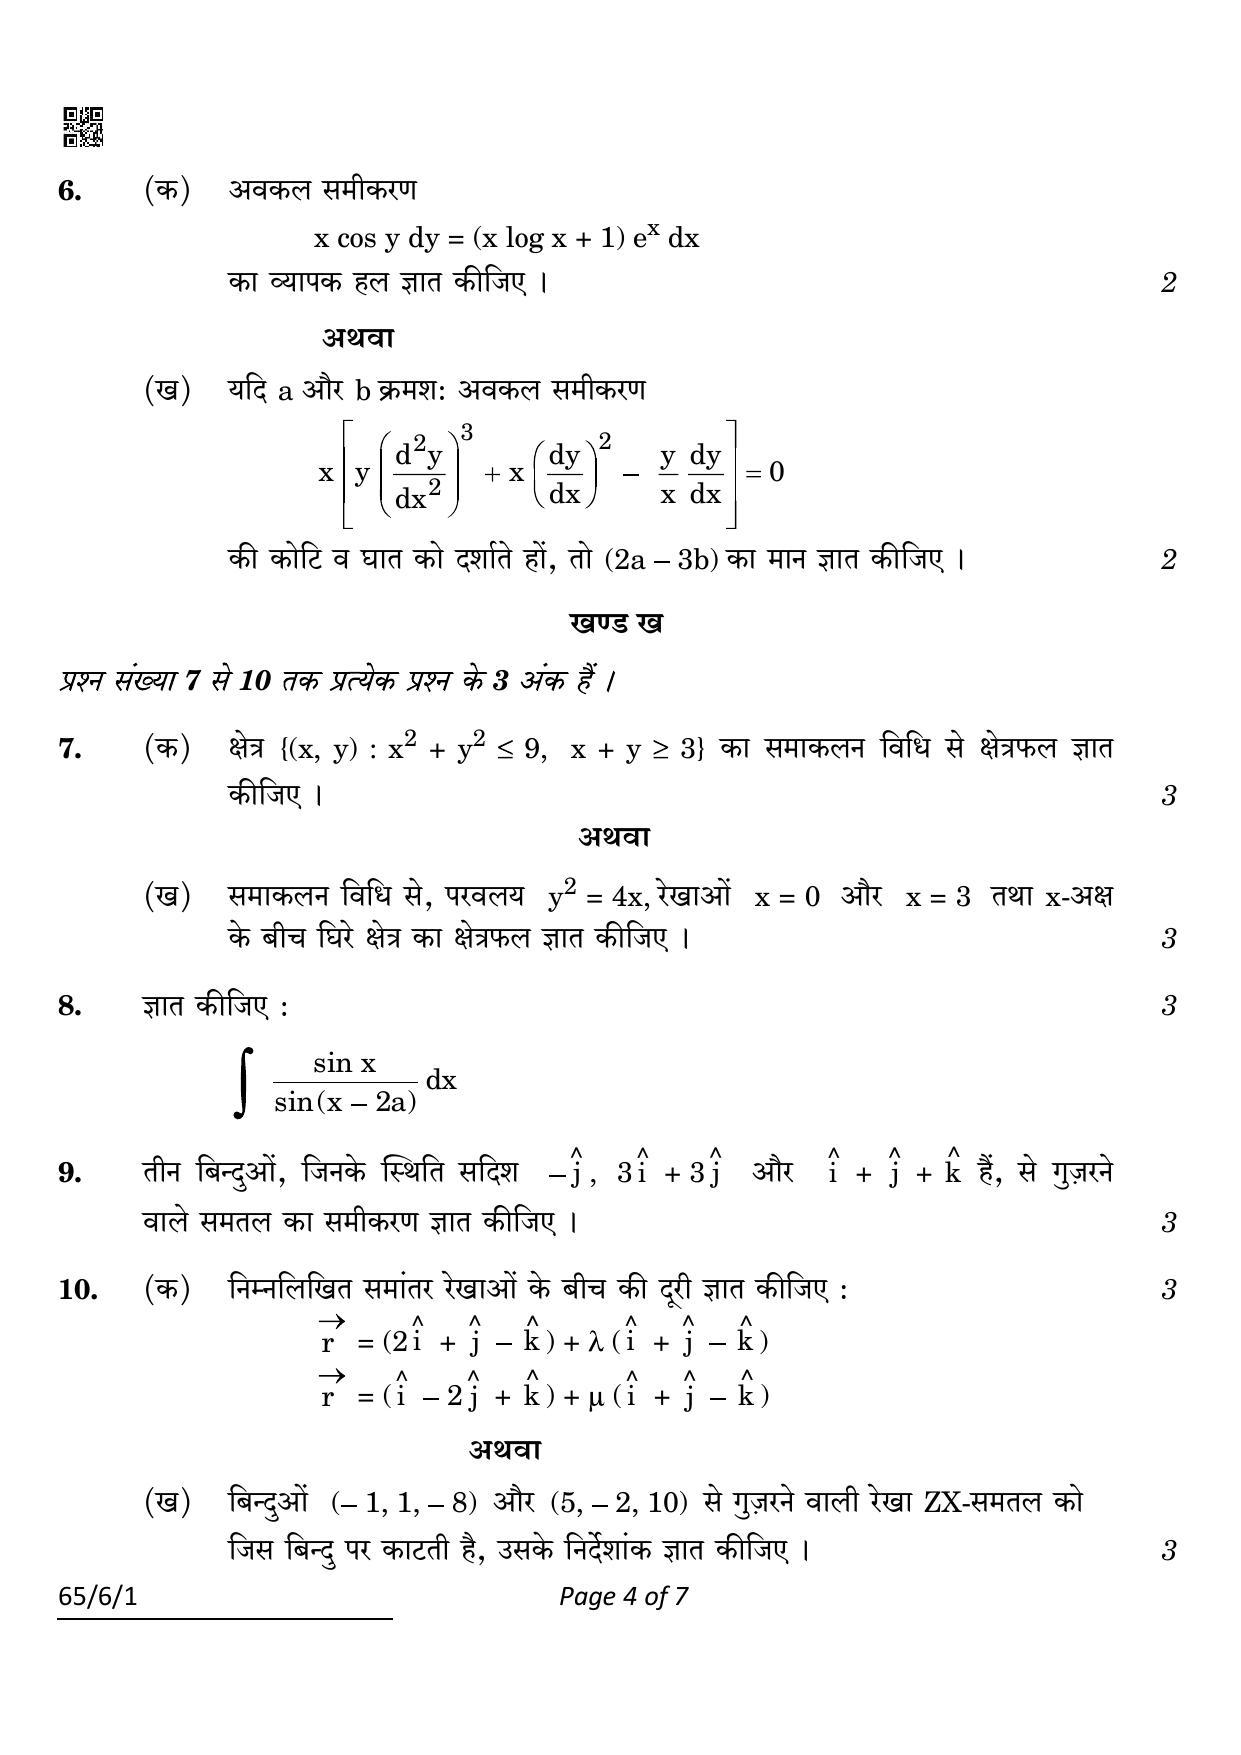 CBSE Class 12 65-6-1 MATHS 2022 Compartment Question Paper - Page 4